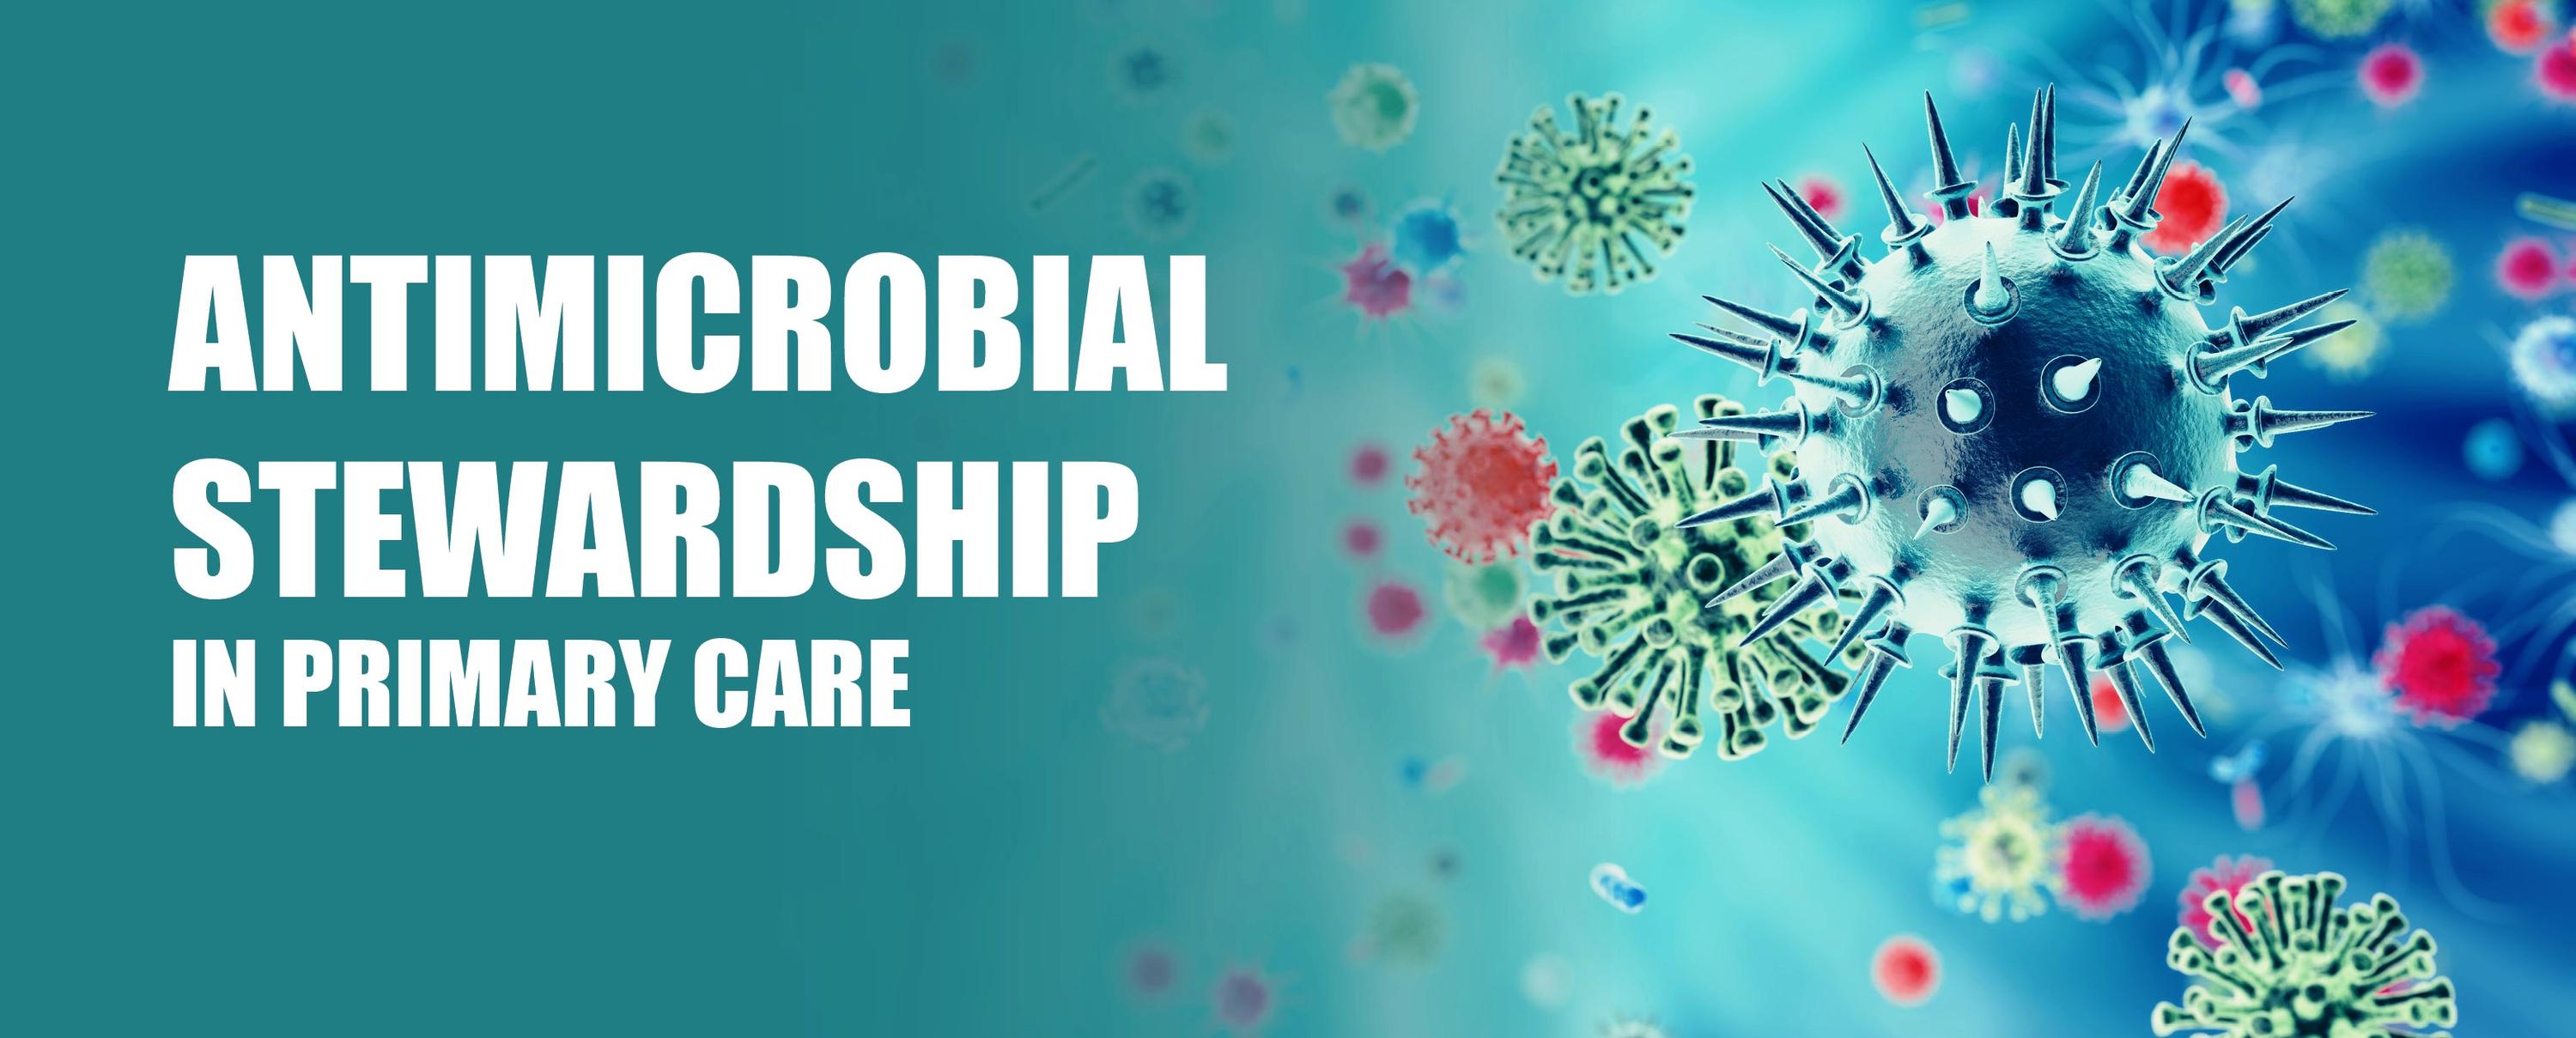 Antimicrobial stewardship in primary care. Colourful images of bacteria.